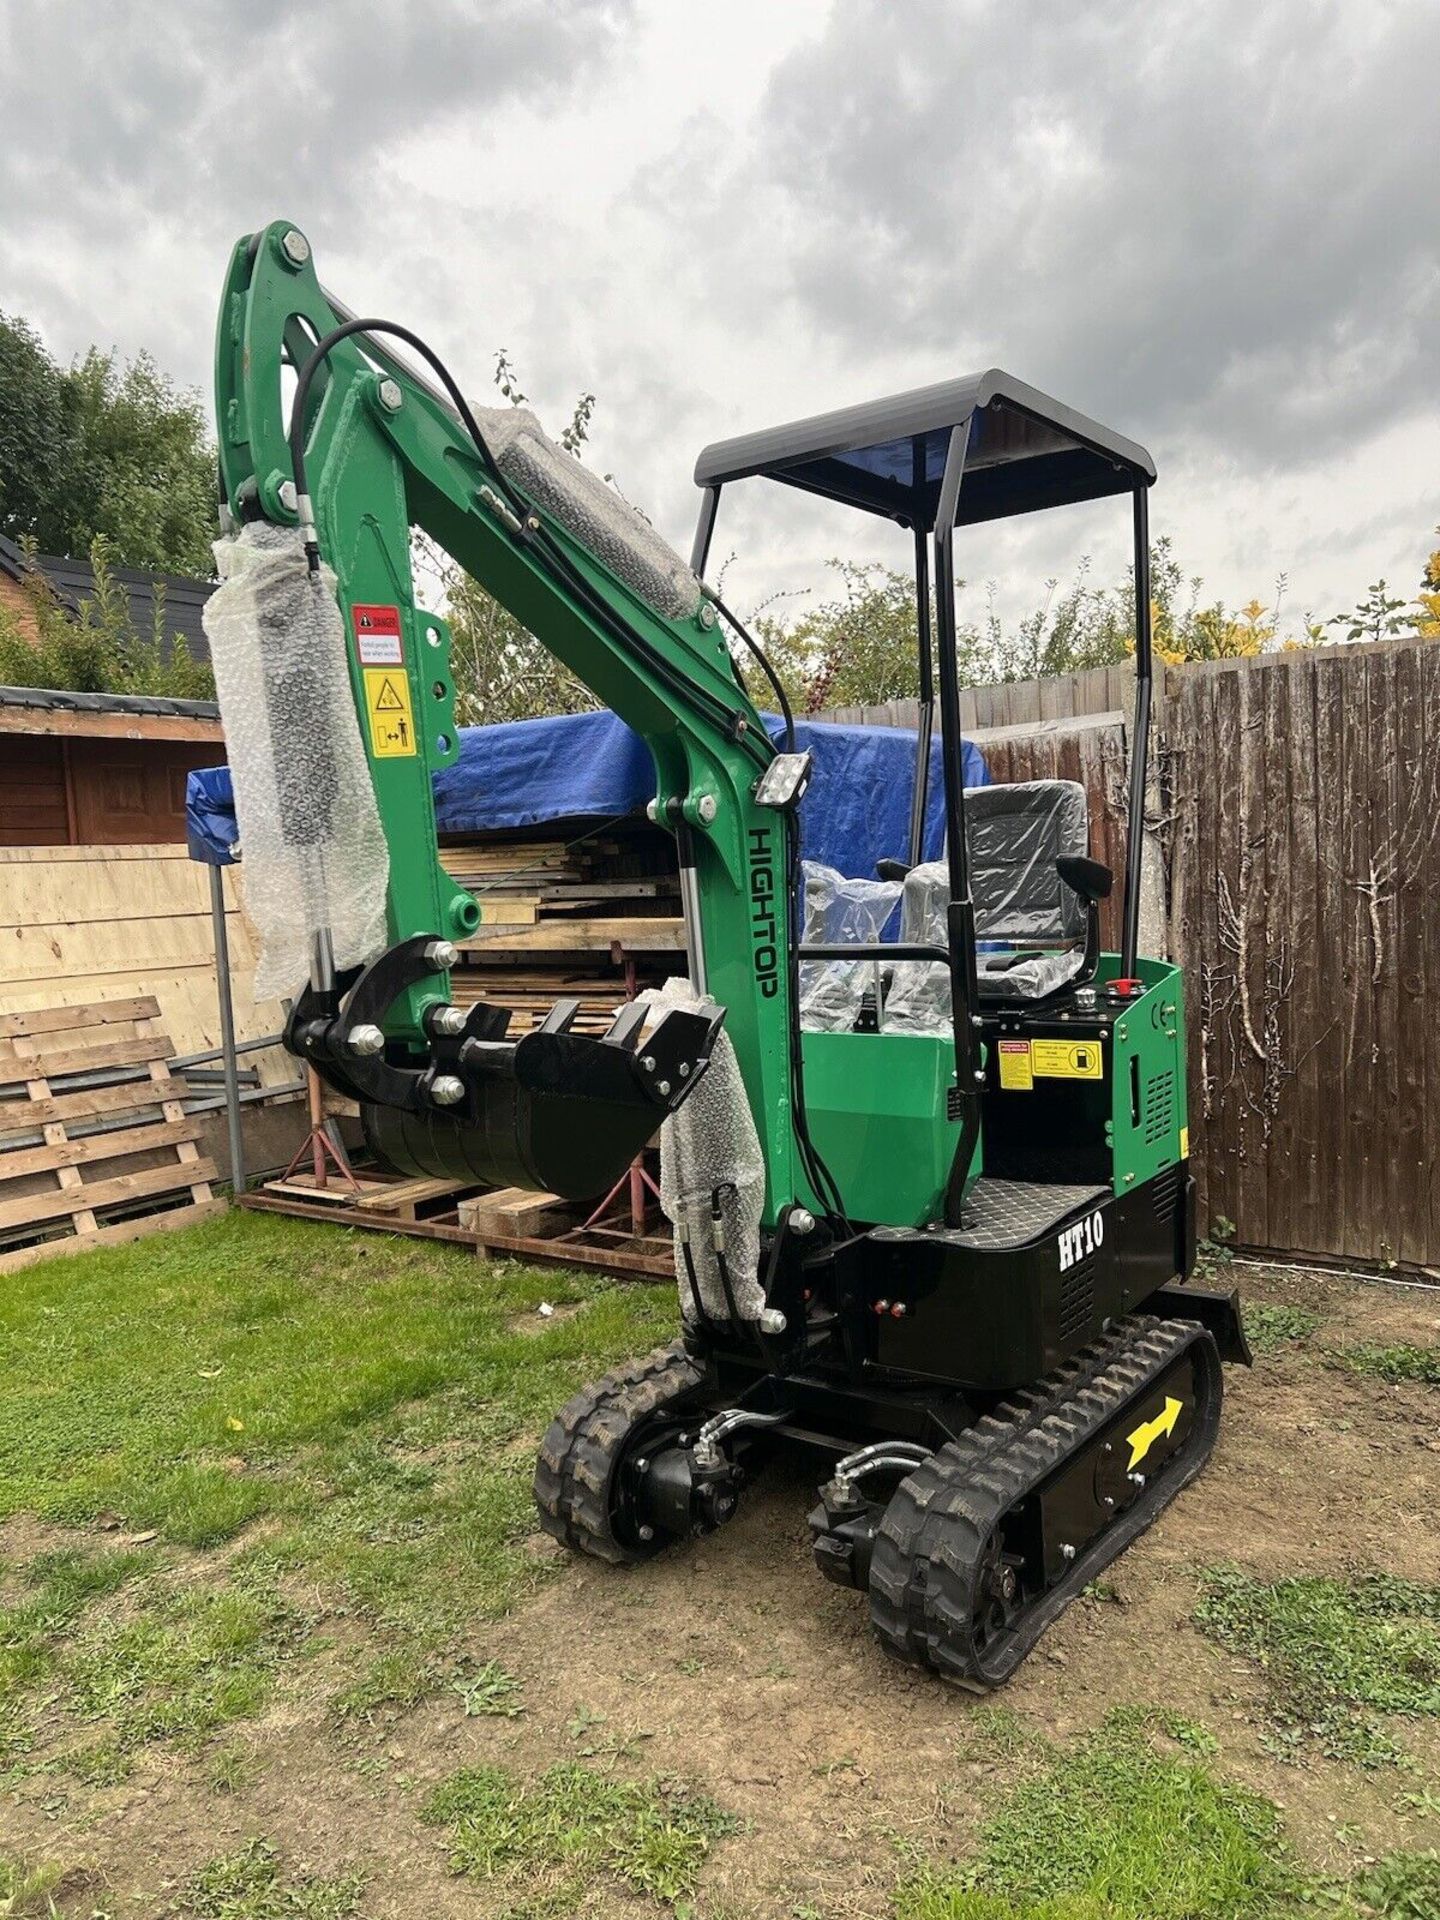 BRAND NEW HIGHTOP HT10 MINI DIGGER EXCAVATOR 1 TON WITH BOOM SWING & 3 BUCKETS - Image 2 of 11